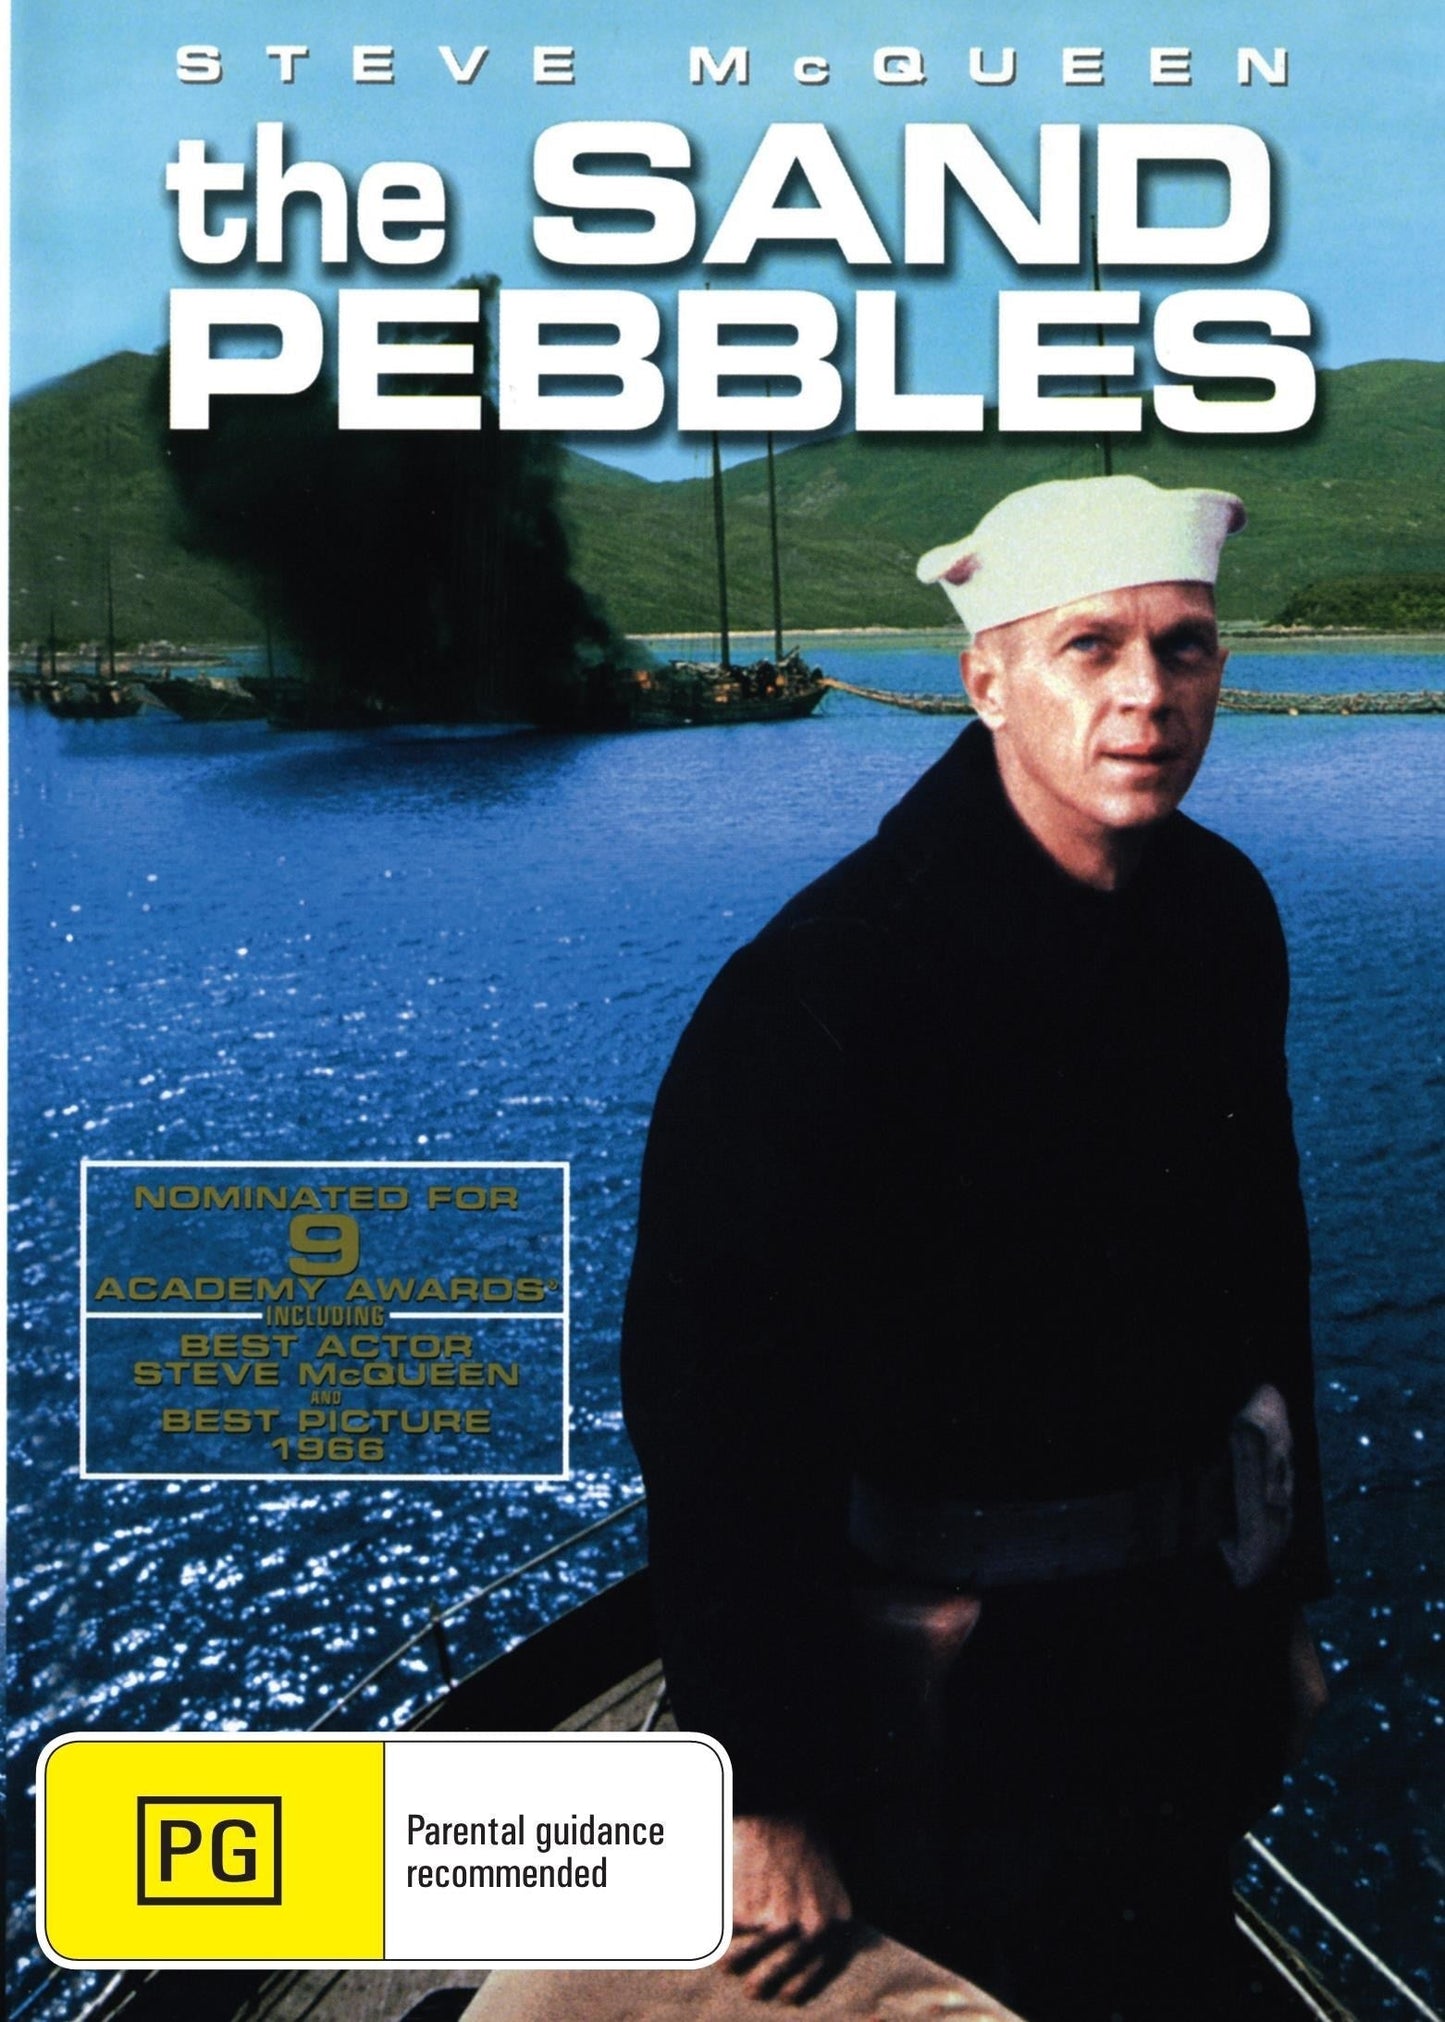 The Sand Pebbles rareandcollectibledvds